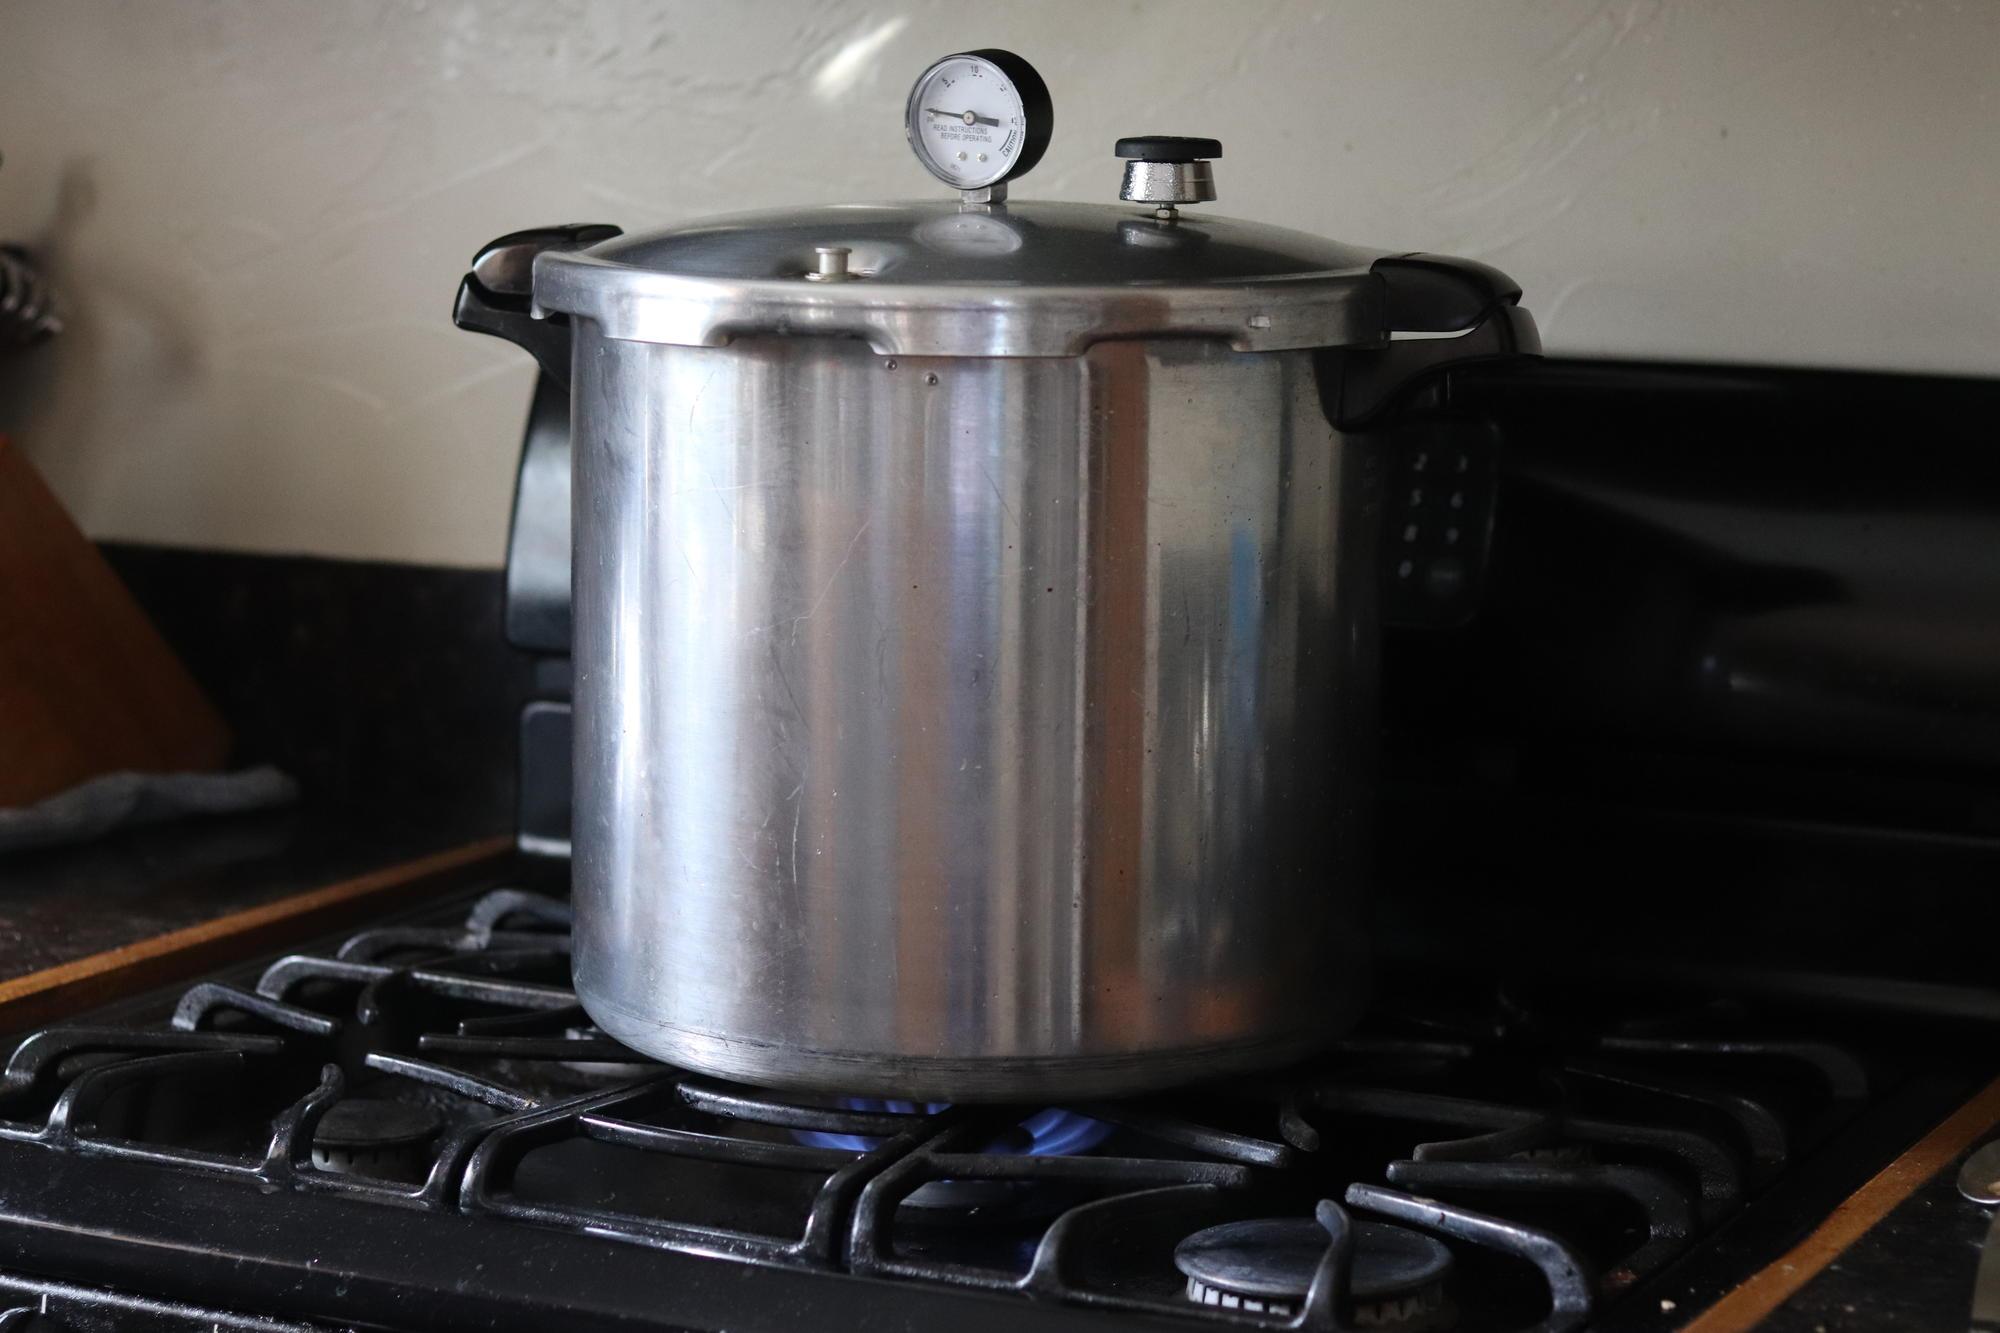 A pressure canner on a gas stove.